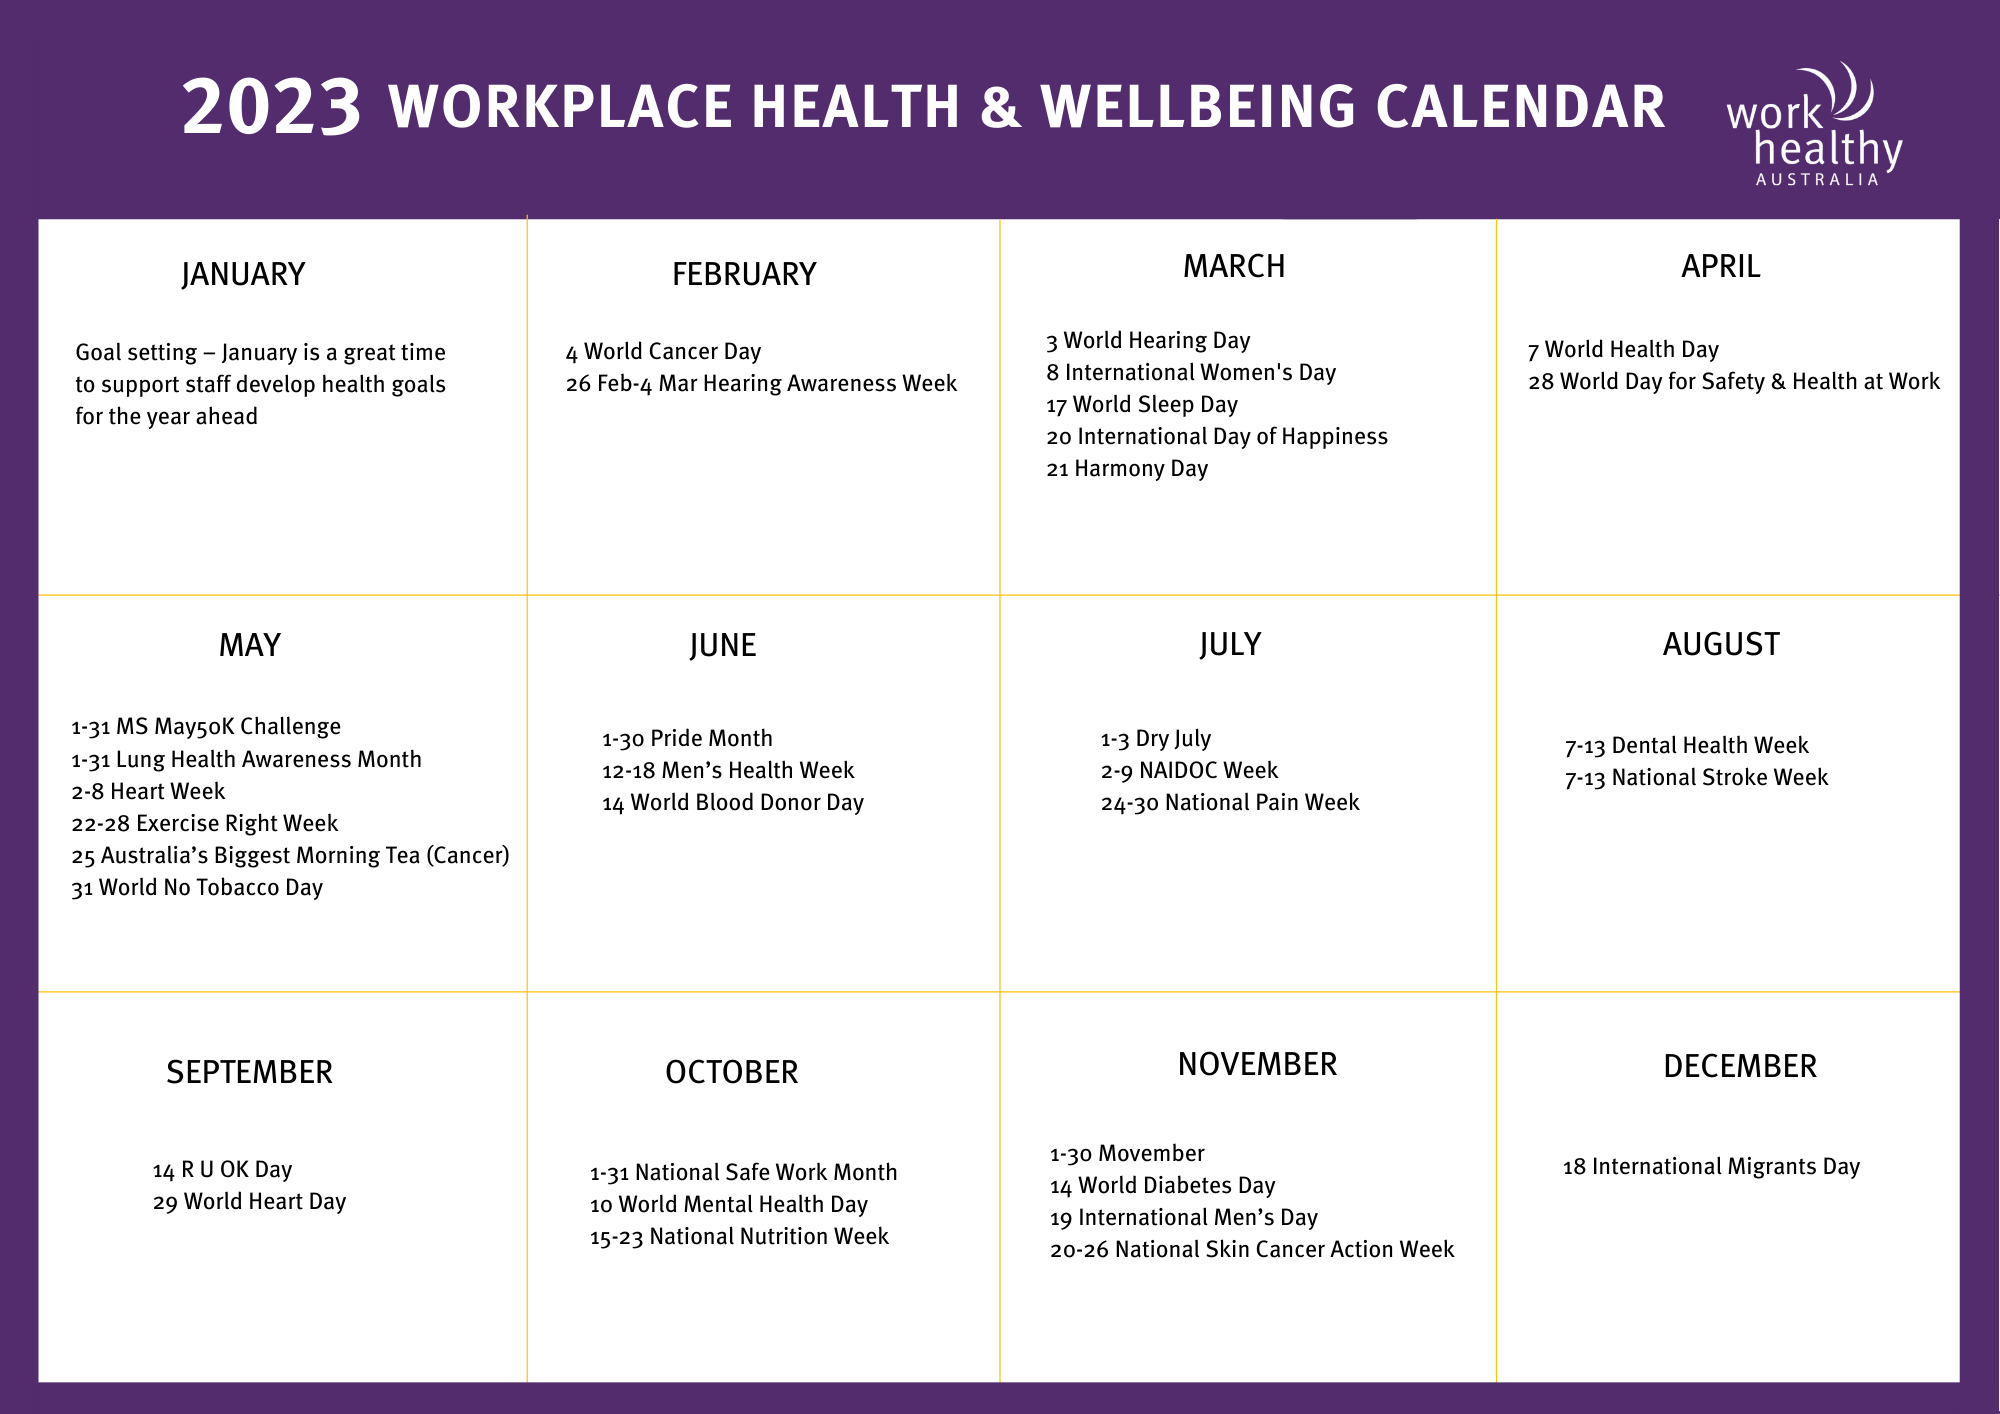 10 tips to promote workplace health and wellbeing events